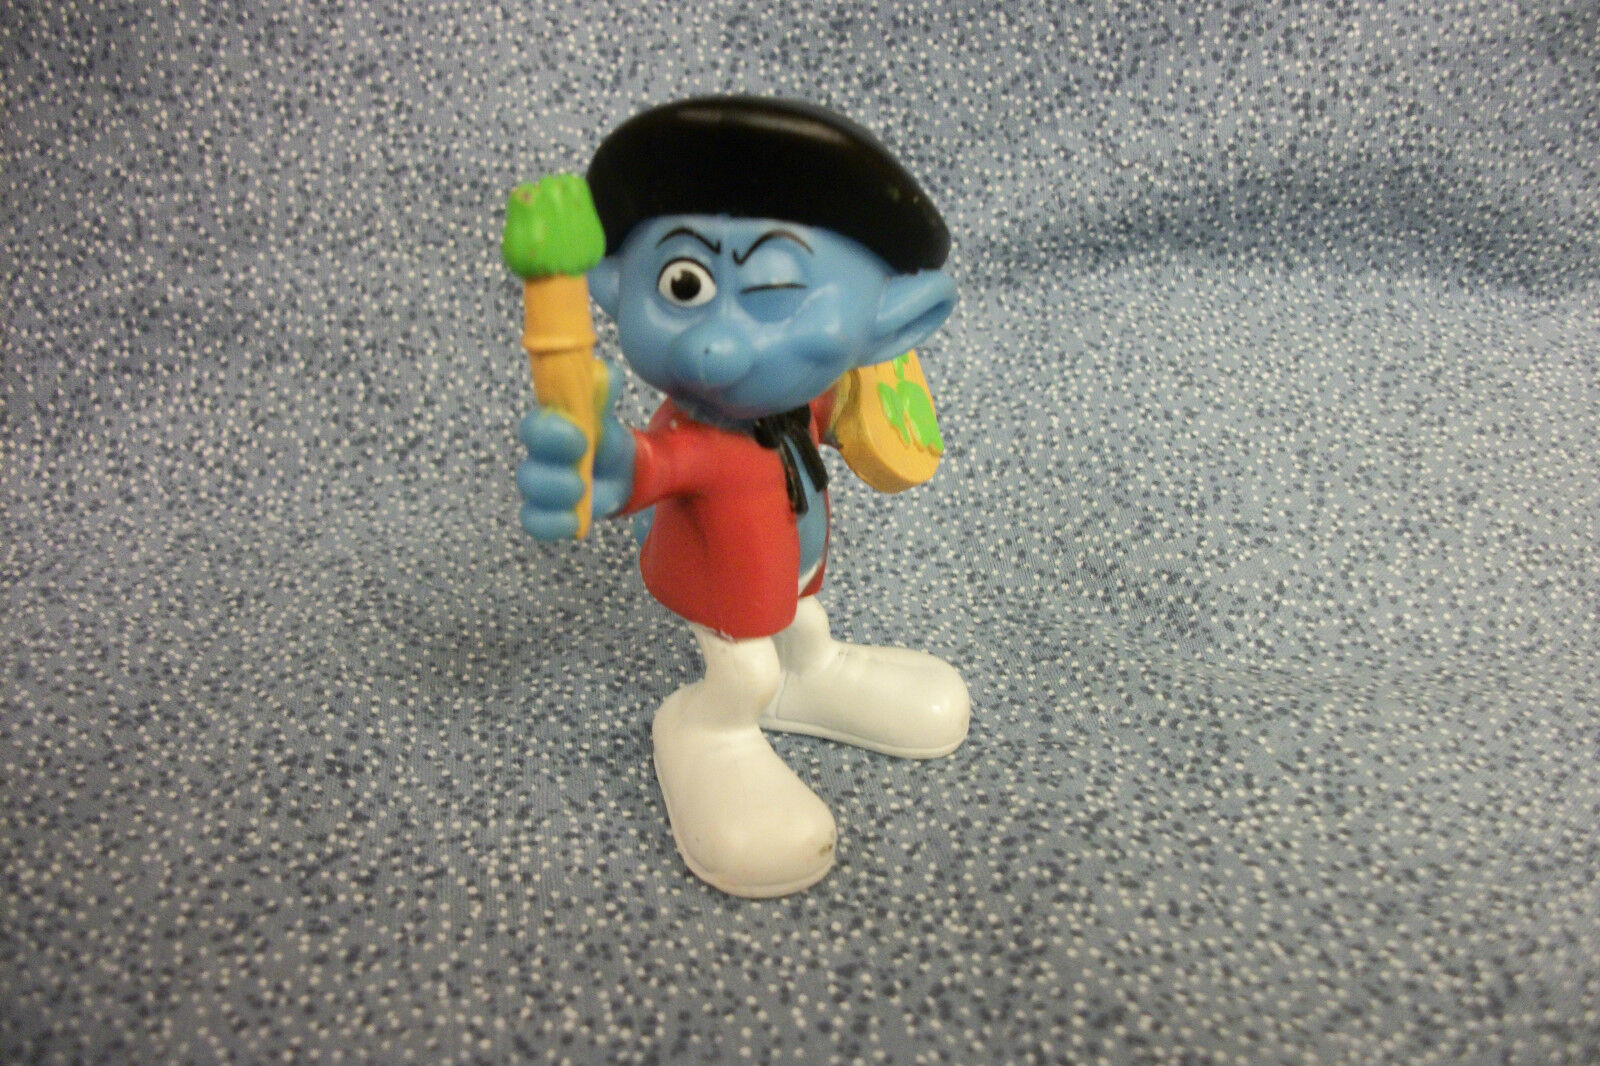 Primary image for  McDonald's 2011 Painter Smurf PVC Figure Toy or Cake Topper 3"